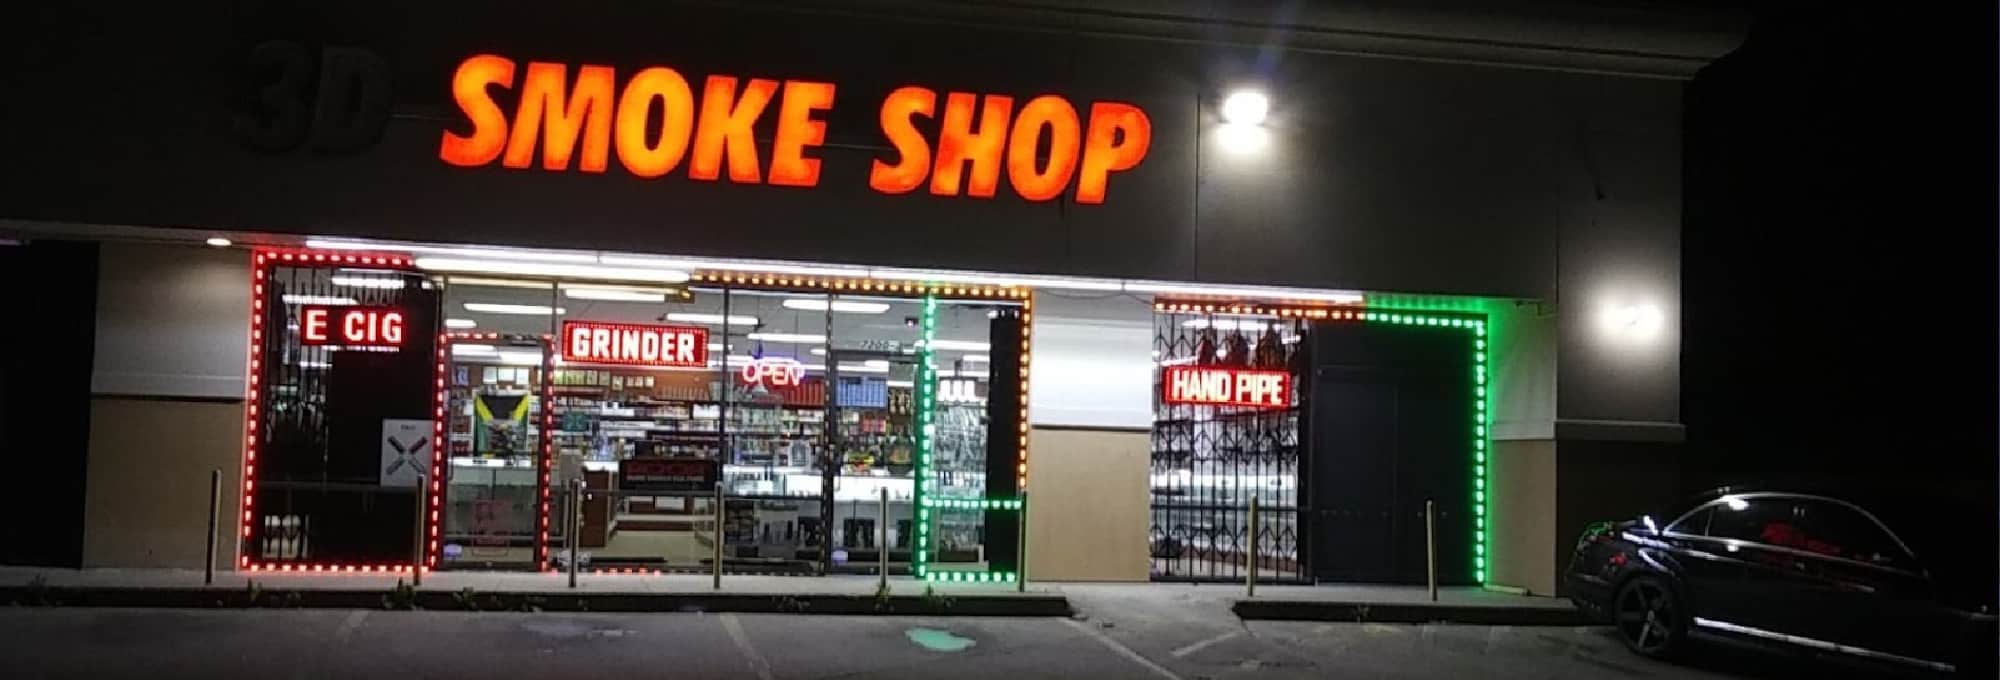 image of 3d smoke shop in richland hills tx